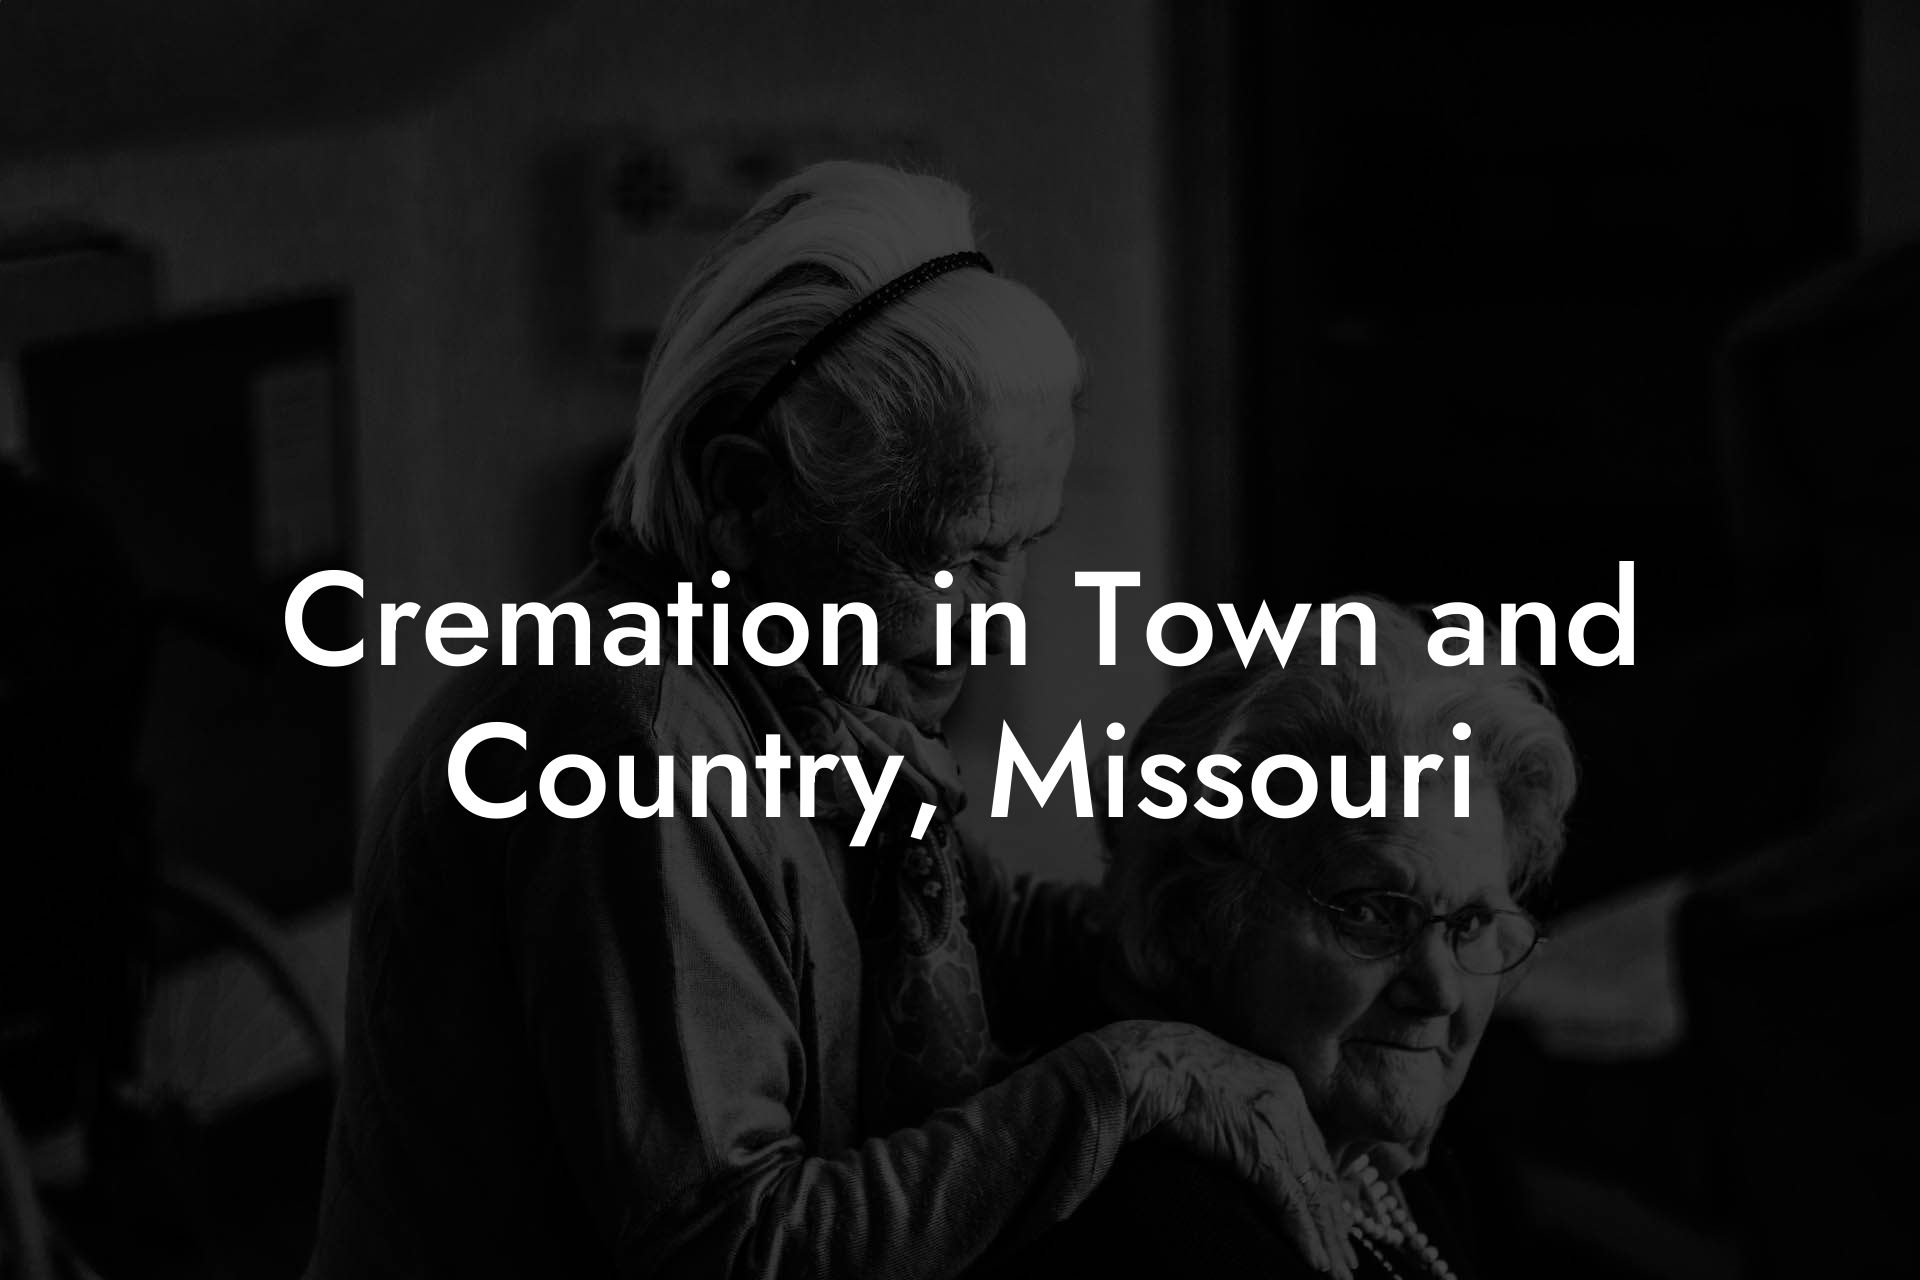 Cremation in Town and Country, Missouri